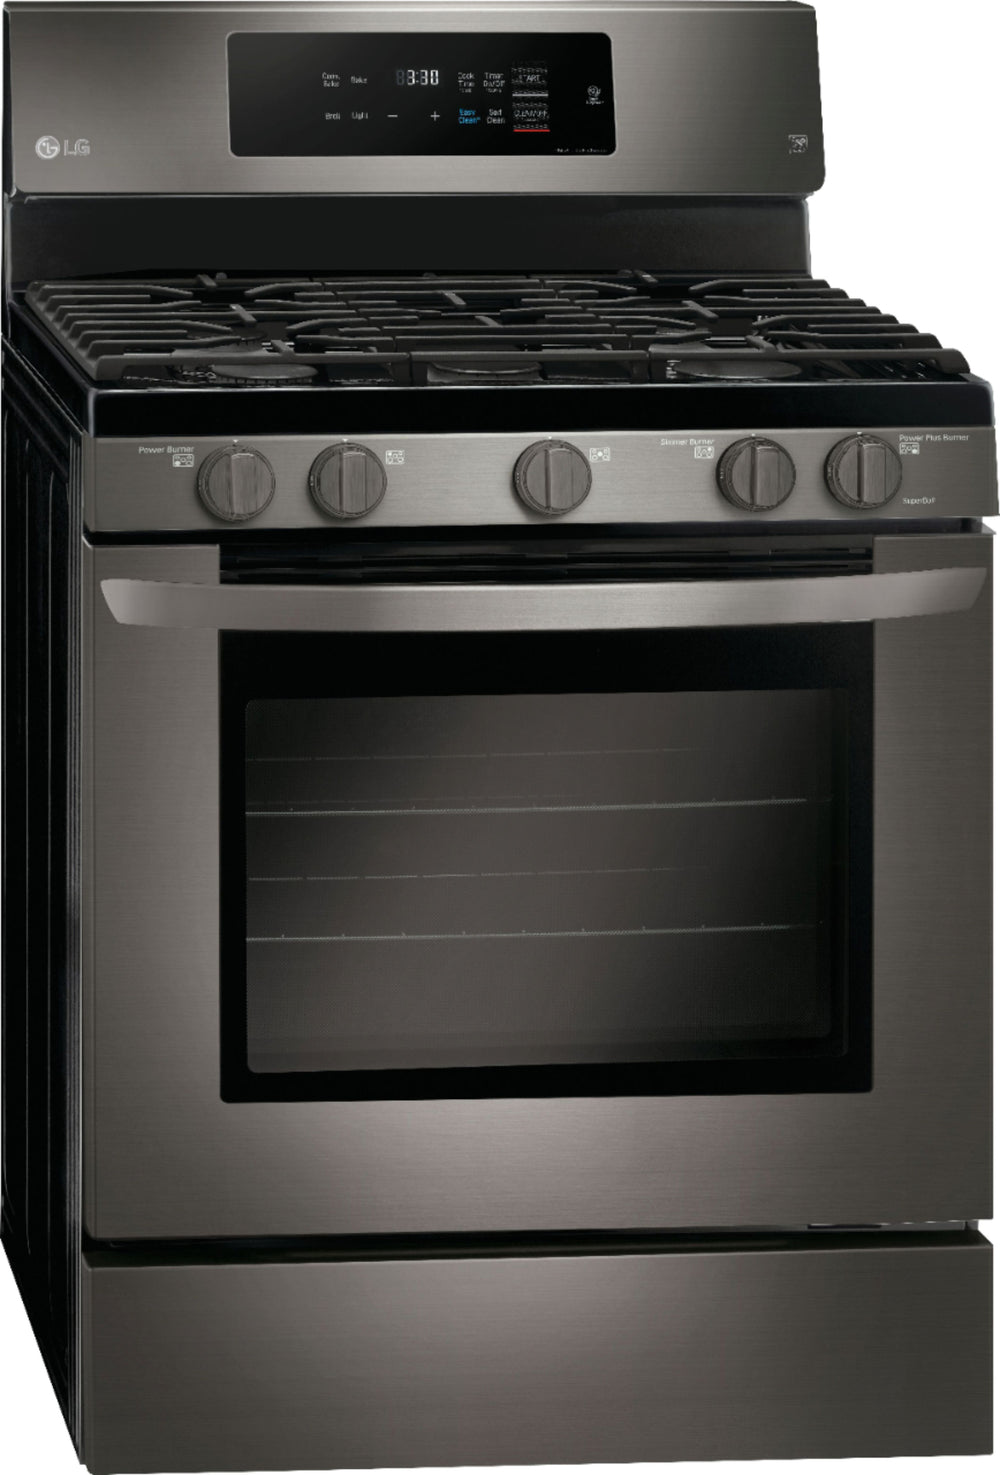 LG - 5.4 Cu. Ft. Self-Cleaning Freestanding Gas Convection Range with EasyClean - Black stainless steel_1